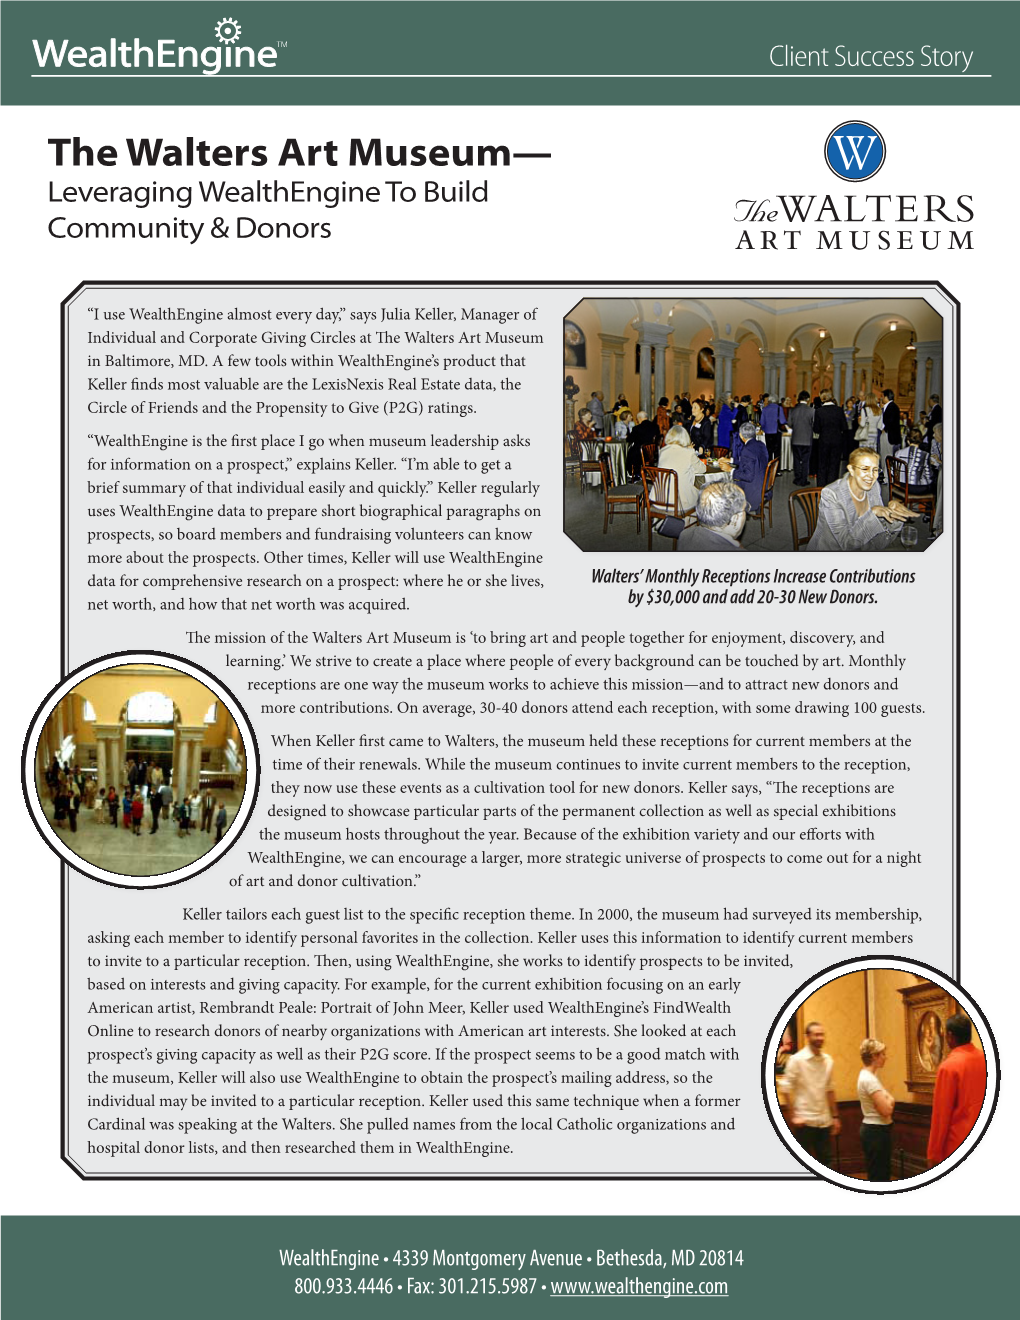 The Walters Art Museum— Leveraging Wealthengine to Build Community & Donors